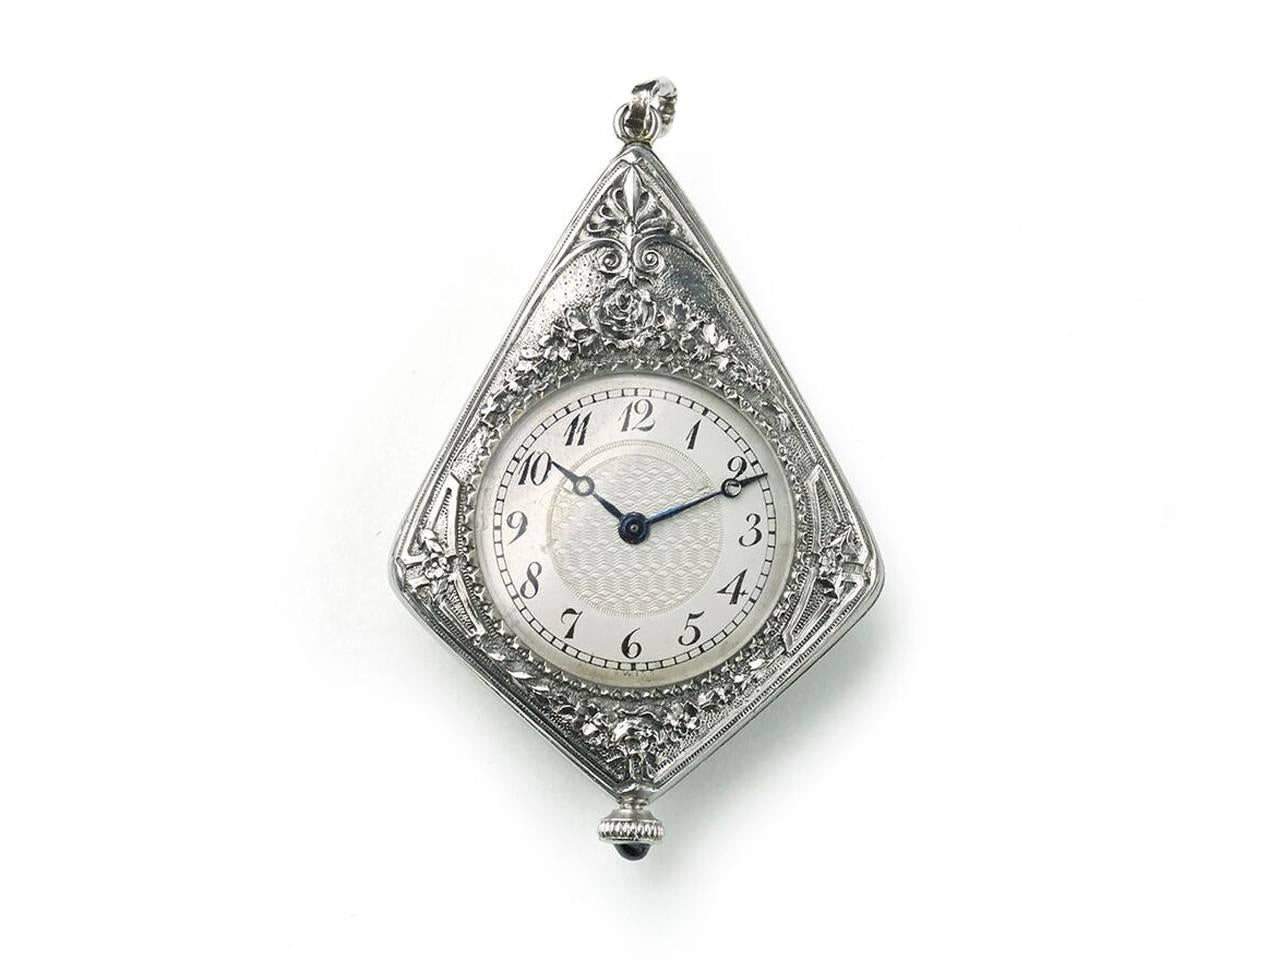 An Art Deco watch pendant, with blue guilloche enamel, with a thistle design within an ace motif, in the centre, set with old-cut and rose-cut diamonds and a foliate engraved and old-cut diamond set surround, on the other side is a watch, with a